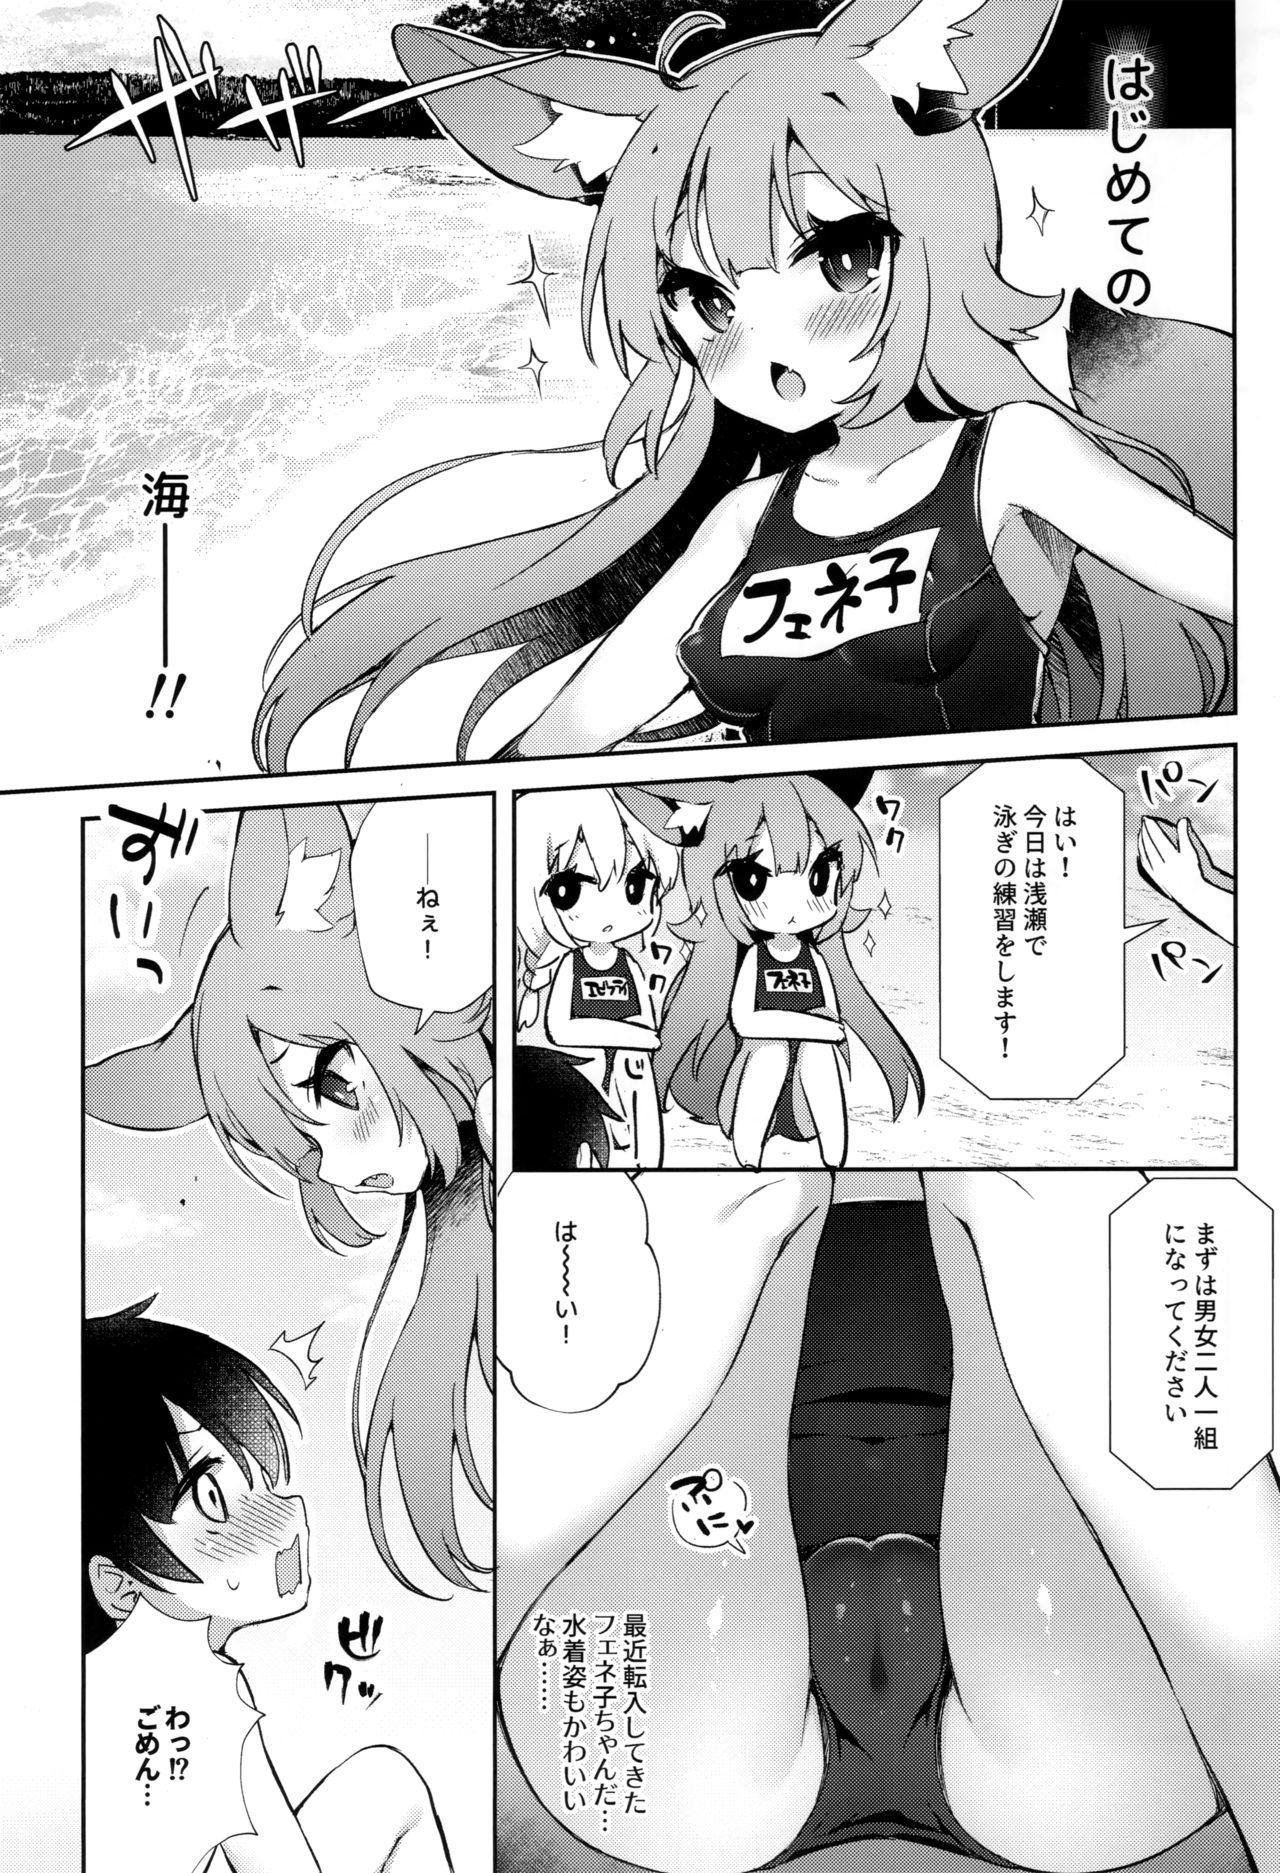 Foursome Fennec Musume Summer! - Original Nude - Page 5